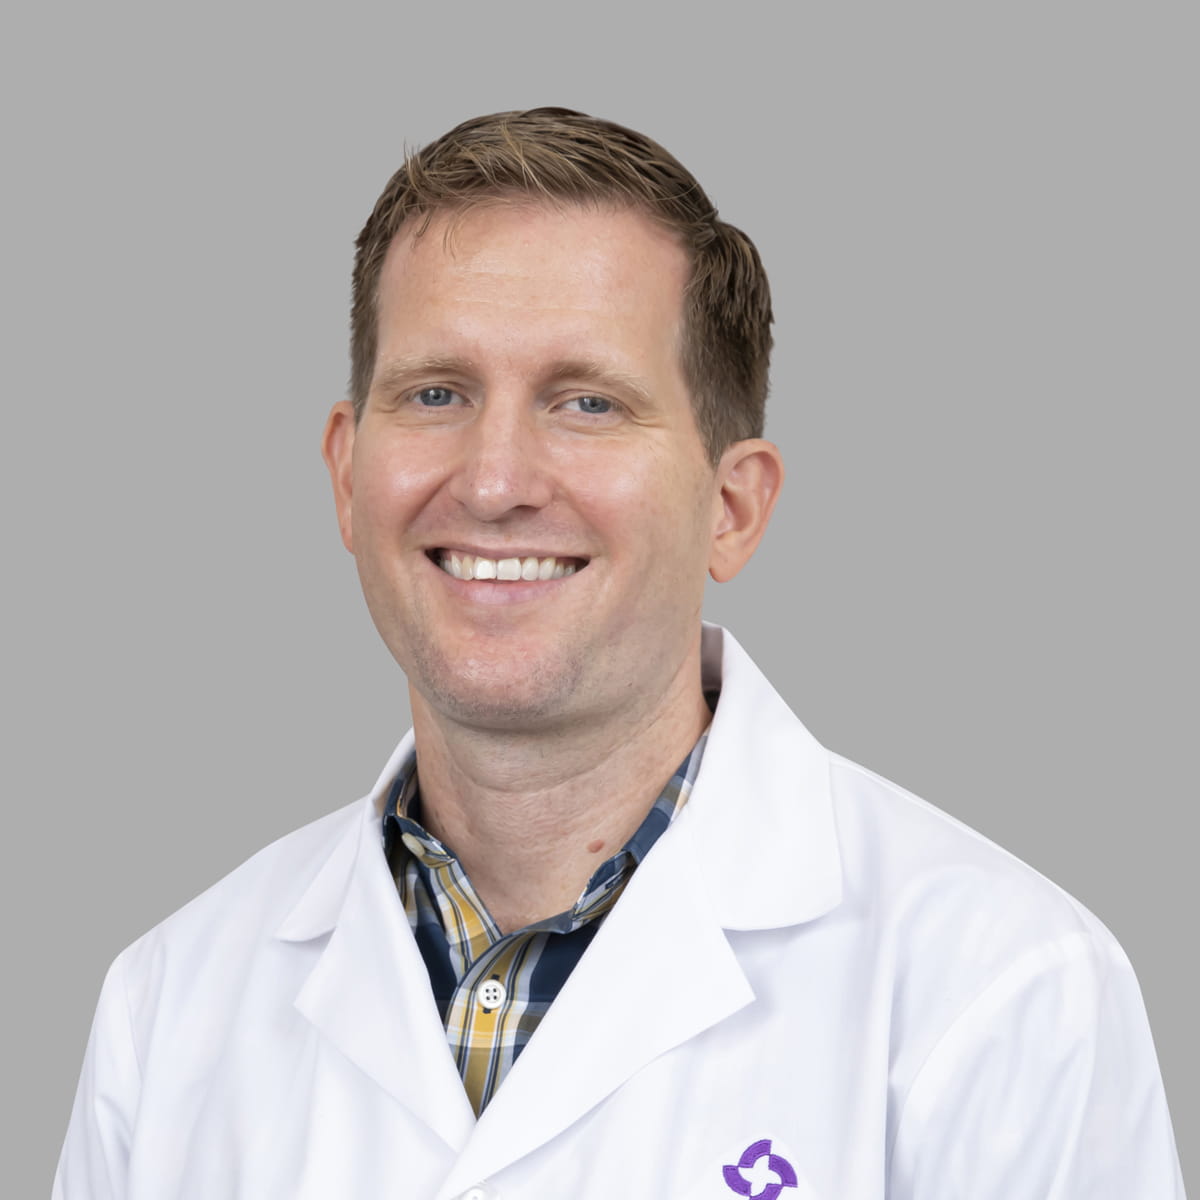 A friendly image of Andrew Thornton, MD